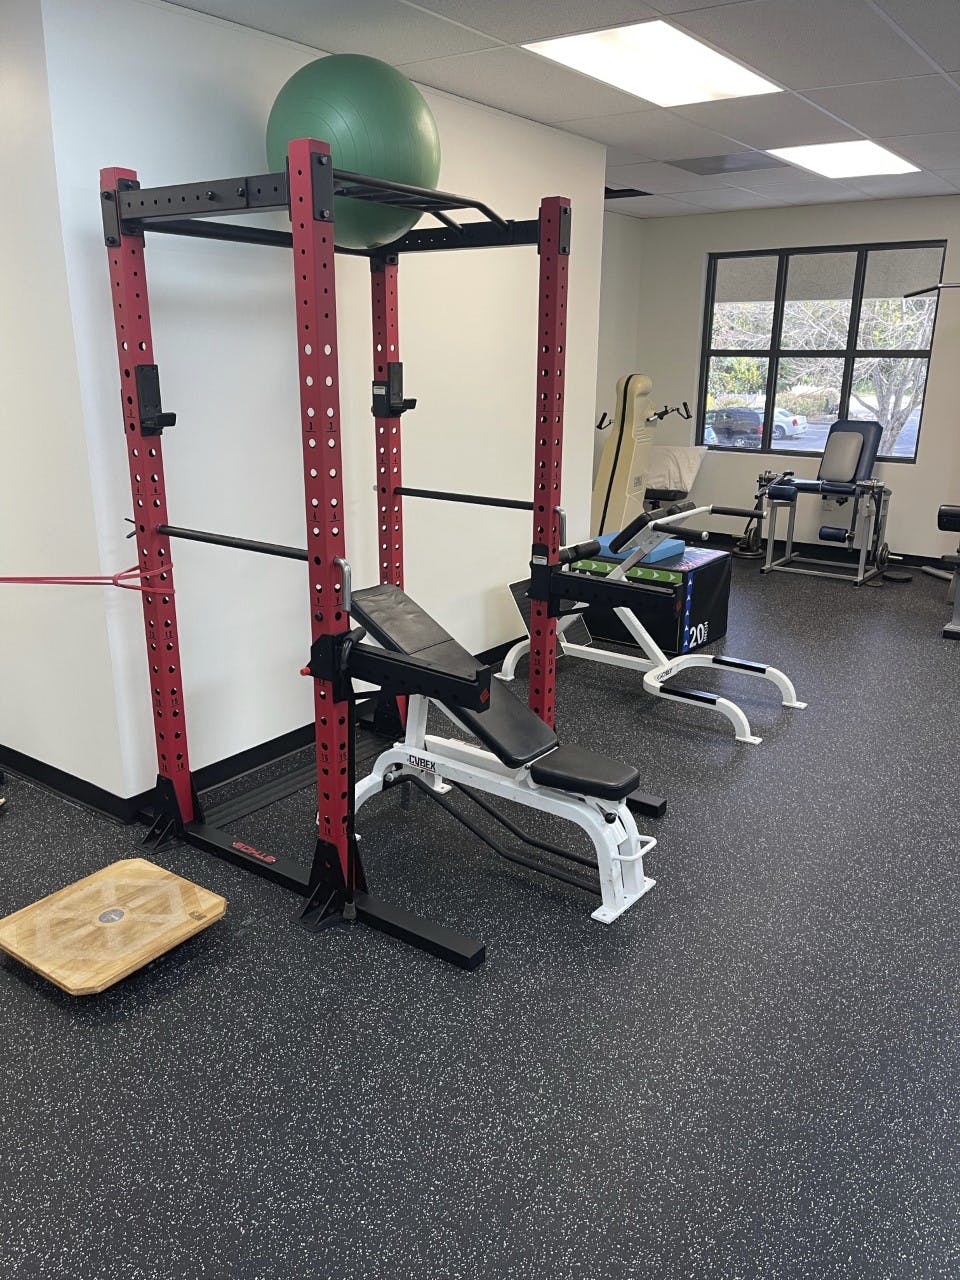 Venture Physical Therapy of Marietta